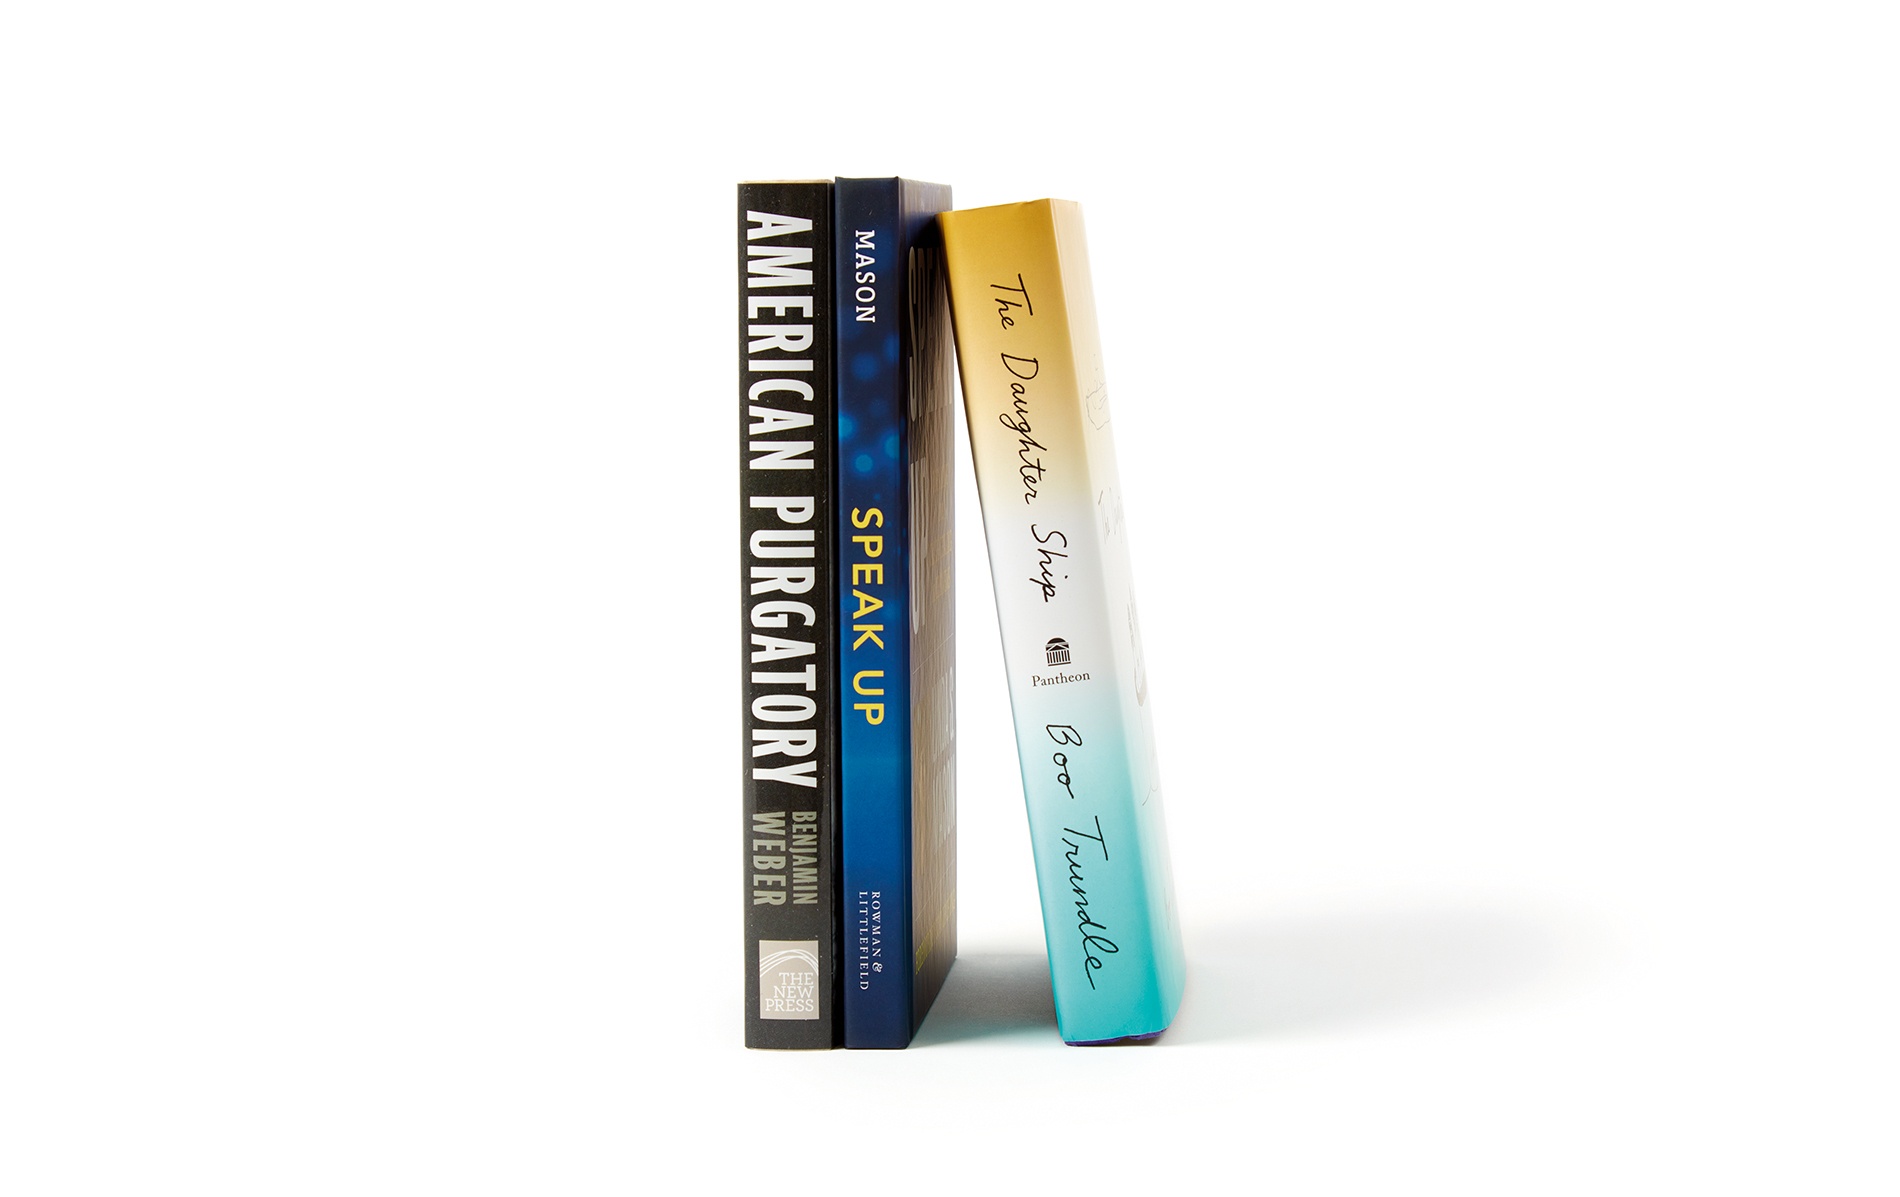 Image of books by Boo Trundle ’89, Benjamin Weber ’08 MAT, and Linda Mason ’64